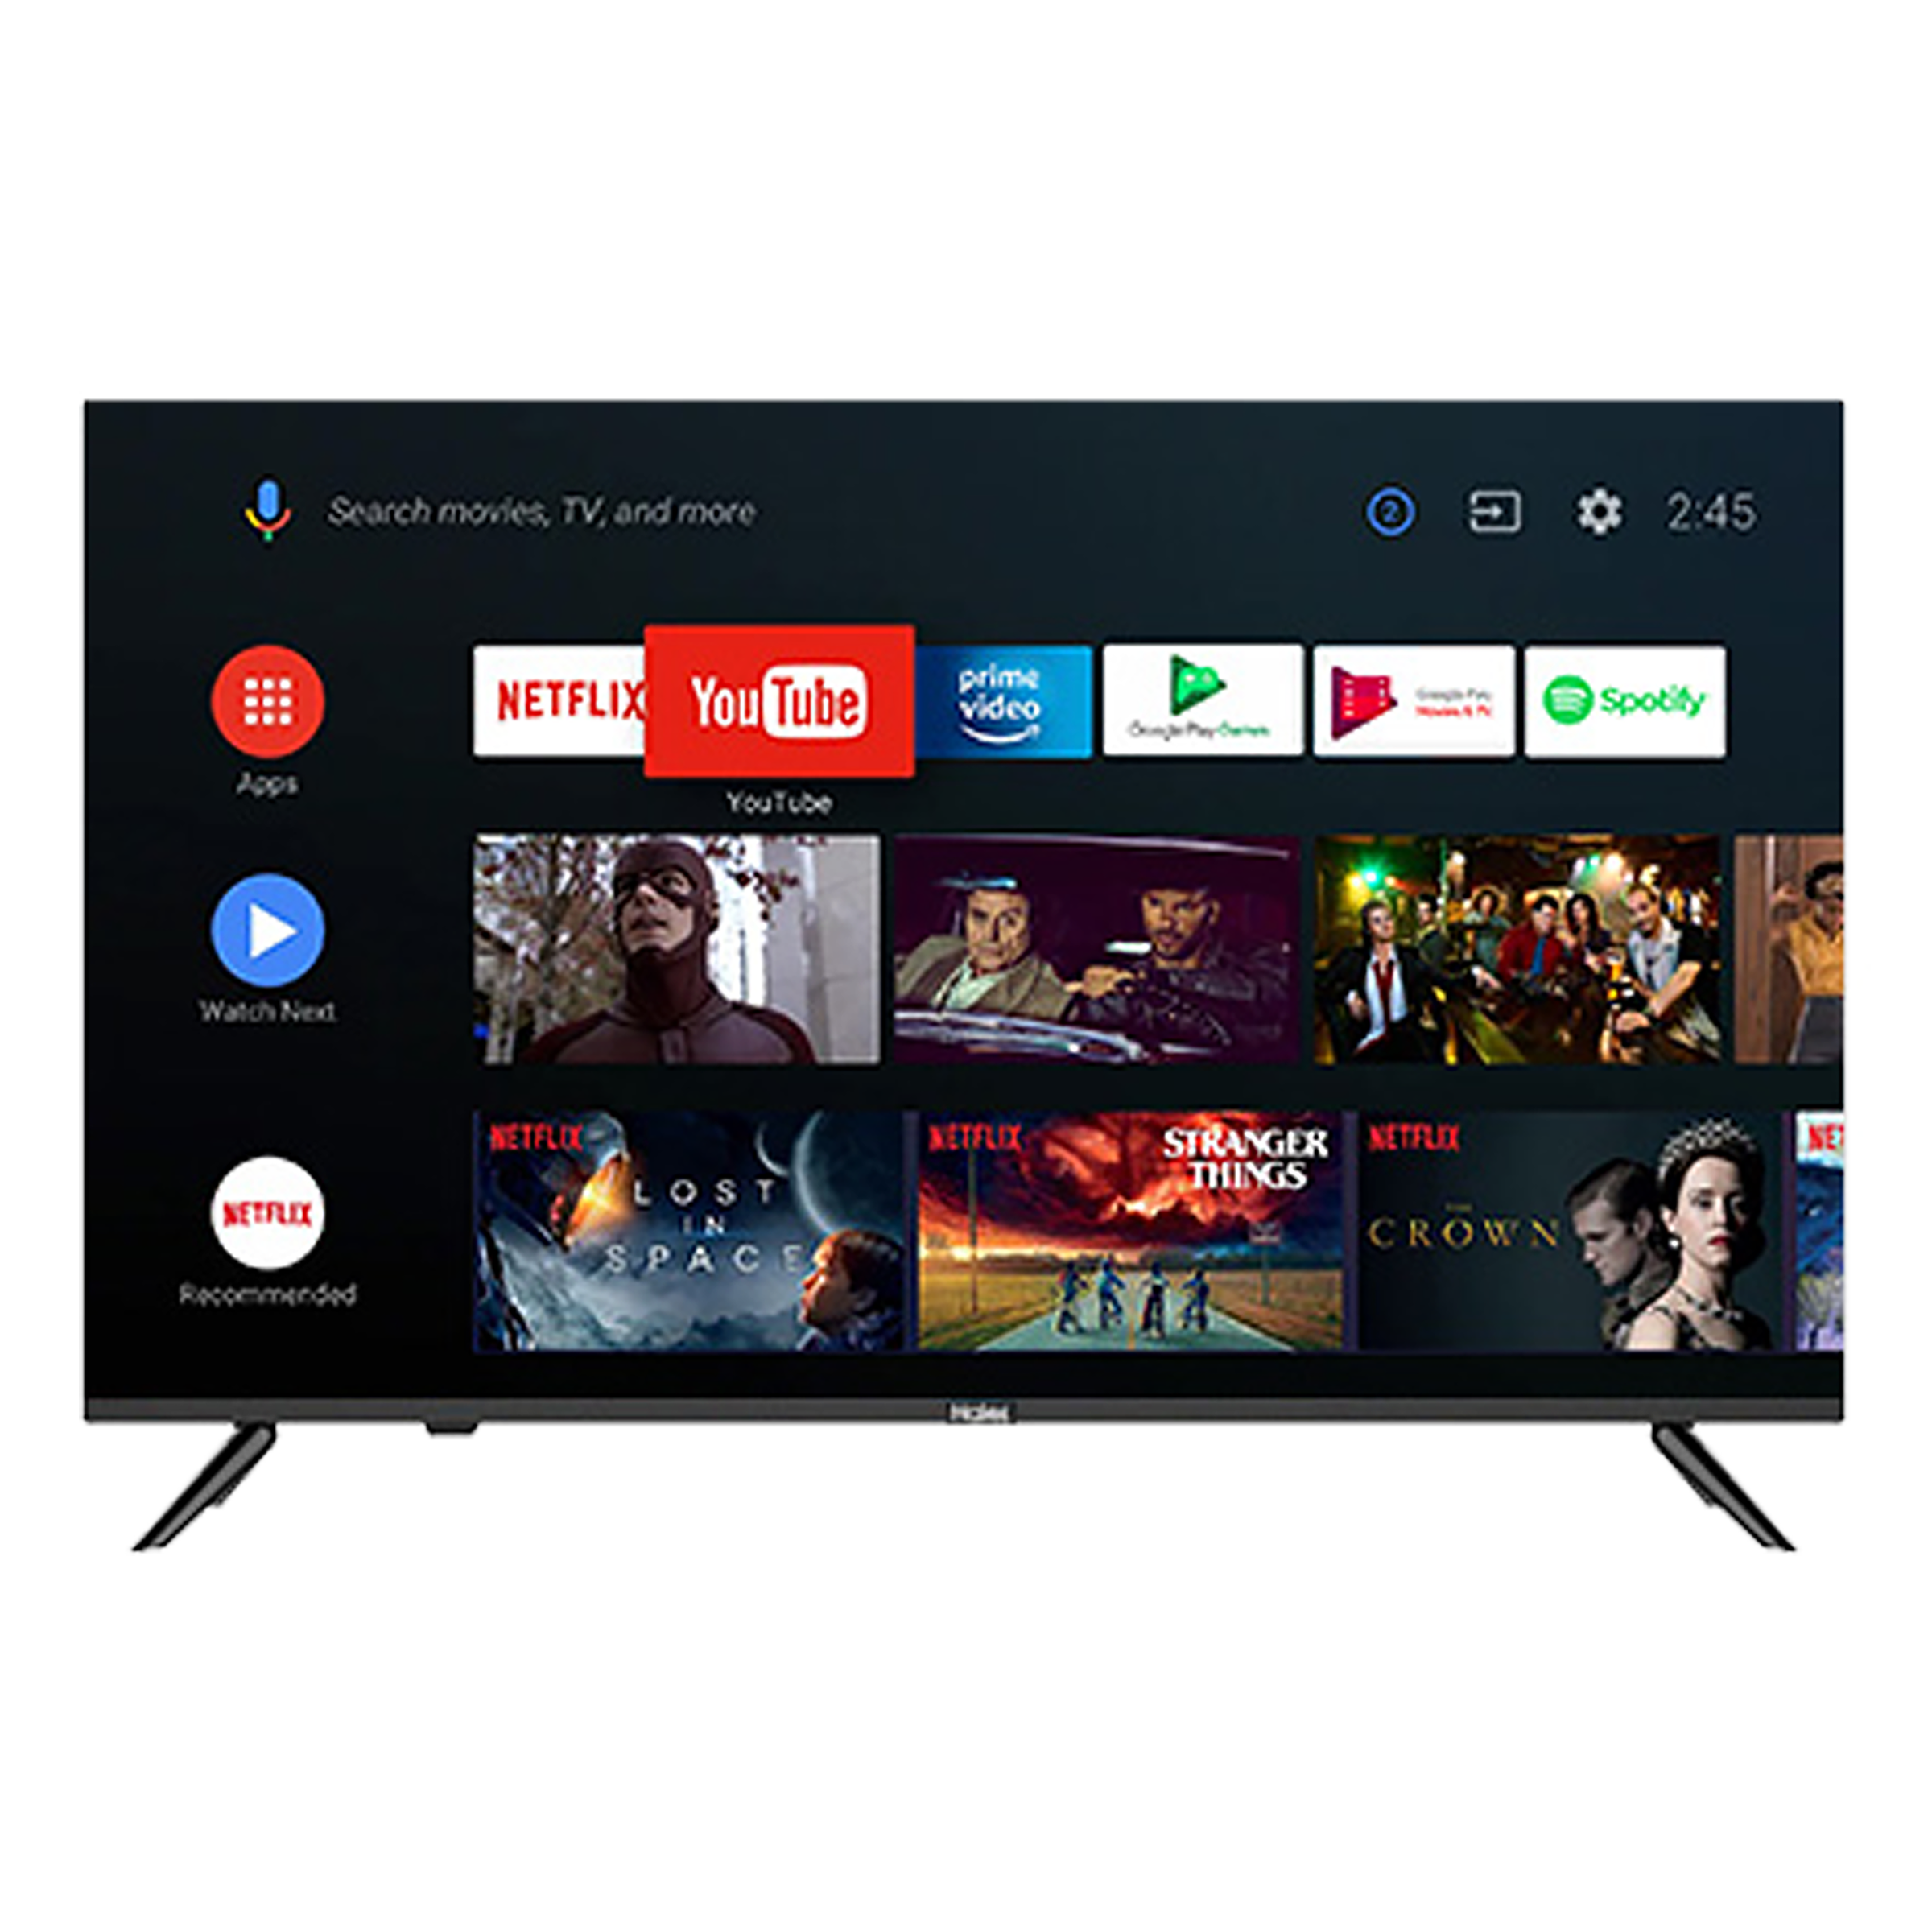 Haier K6600 Series 127 cm (50 inch) 4K Ultra HD LED Android TV with Google Assistant (2020 model)